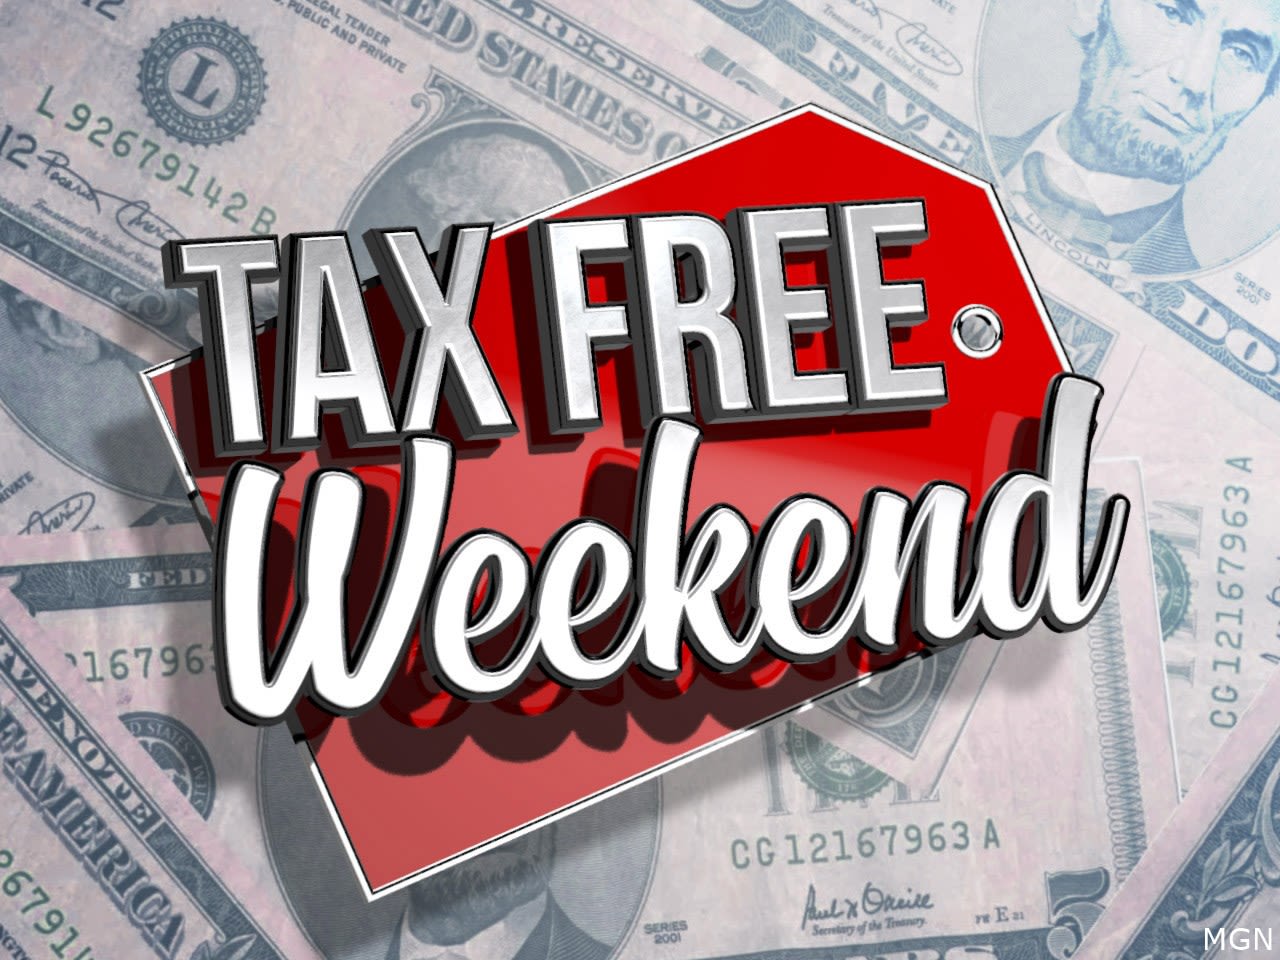 Tennessee's Tax Free weekend coming July 26-28 - WBBJ TV